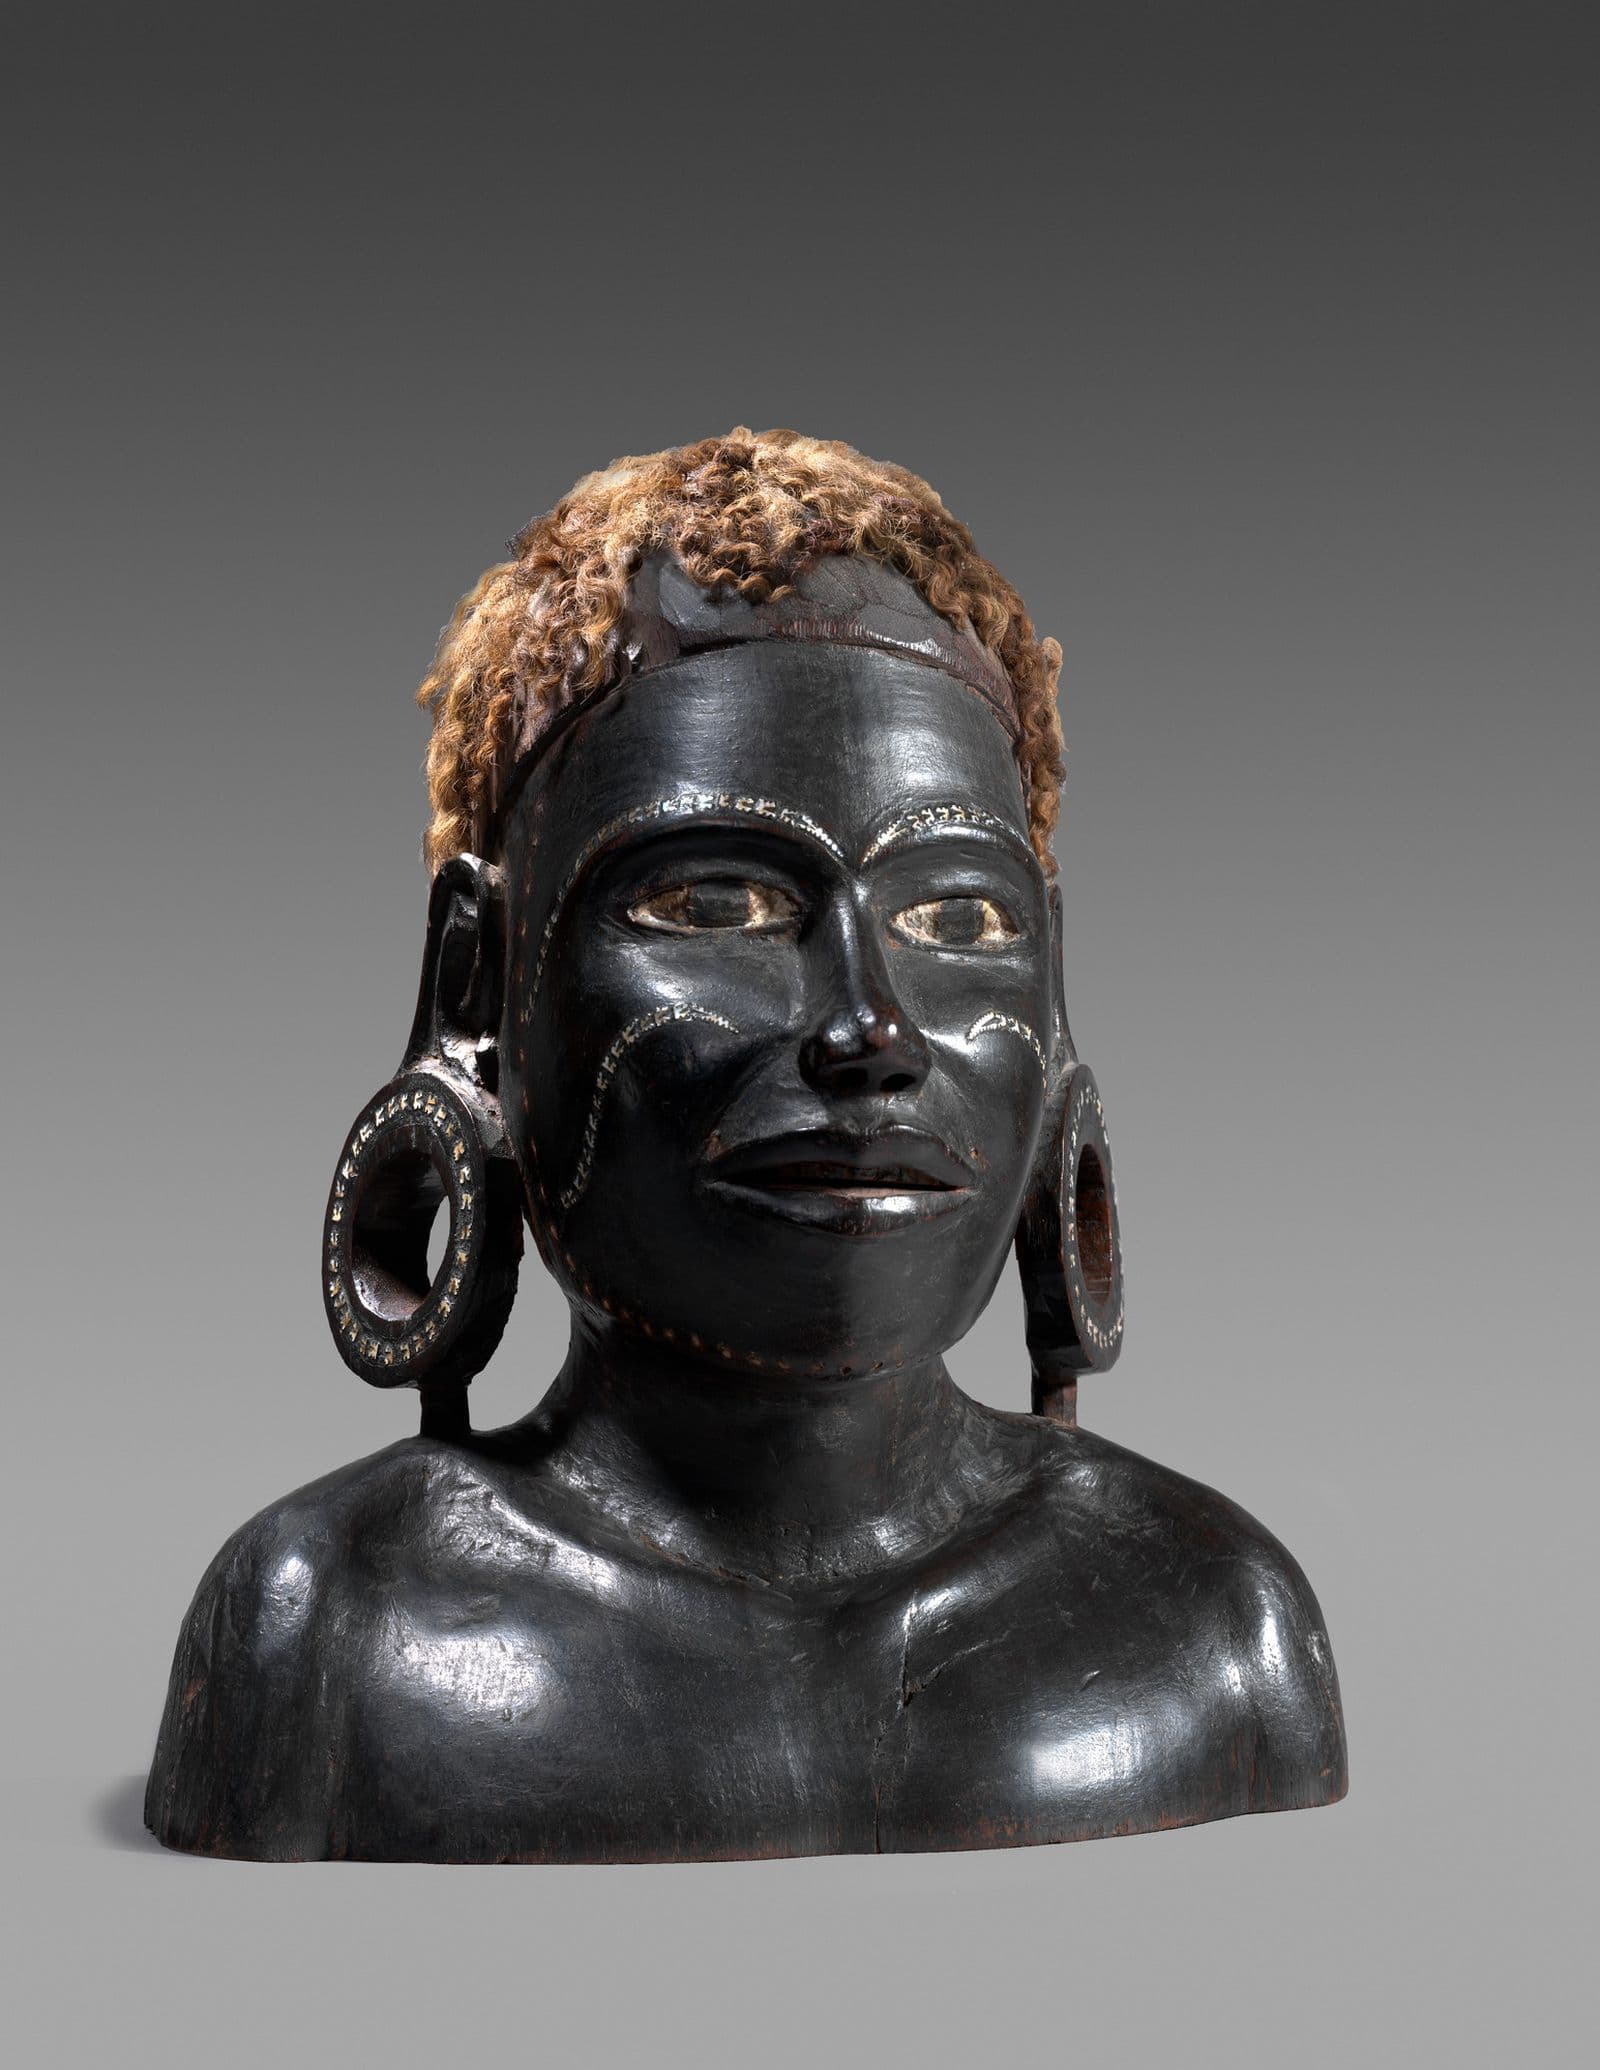 Bust of a young man with stretched earlobes and light curly hair. There are decorative markings on the face and earlobes